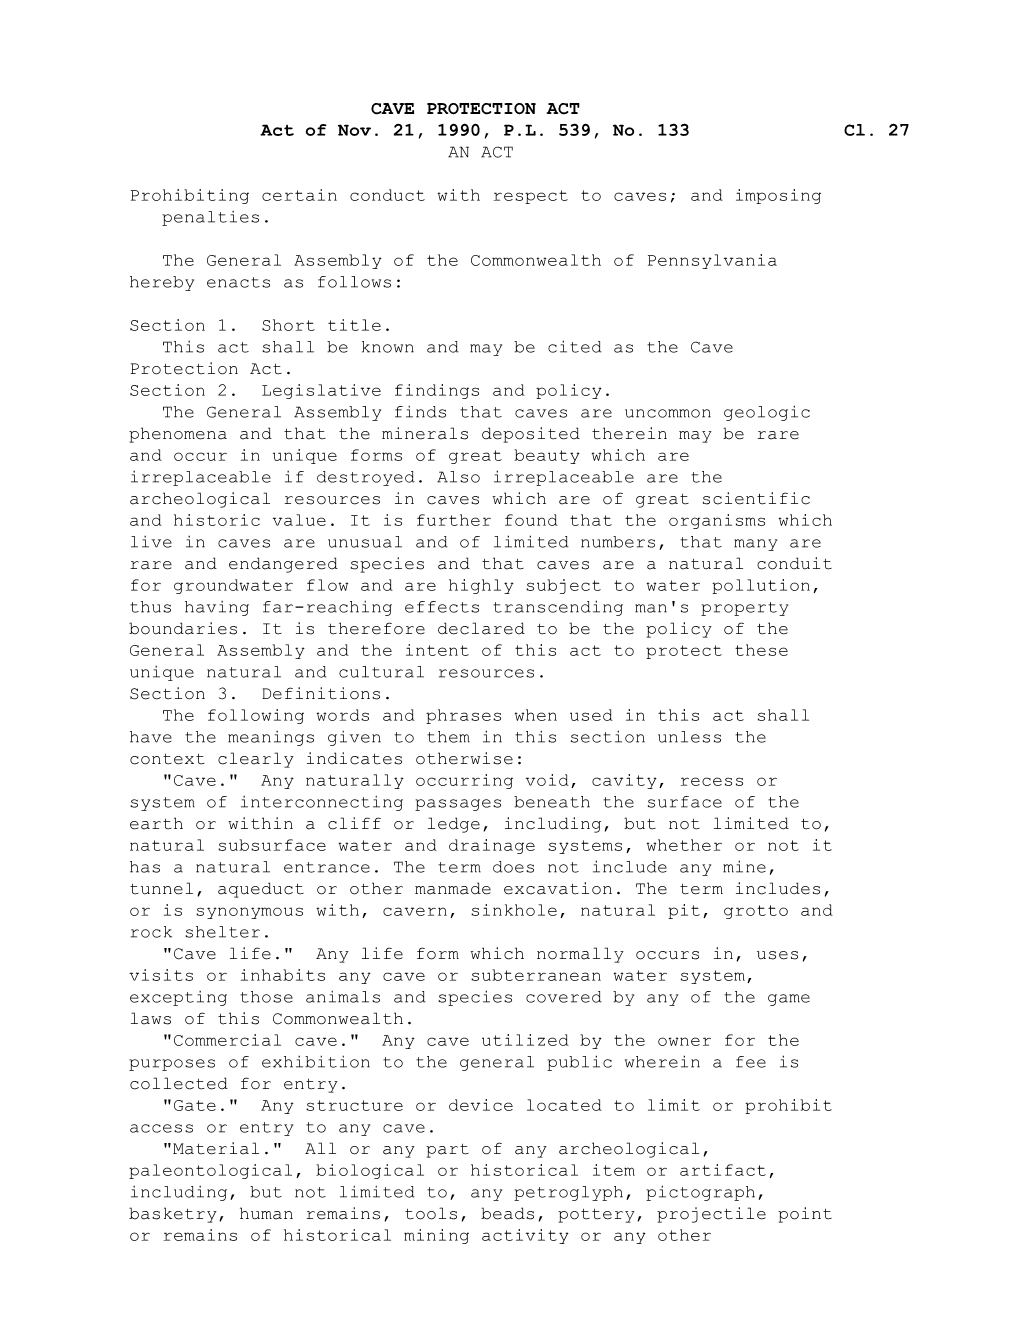 CAVE PROTECTION ACT Act of Nov. 21, 1990, P.L. 539, No. 133 Cl. 27 an ACT